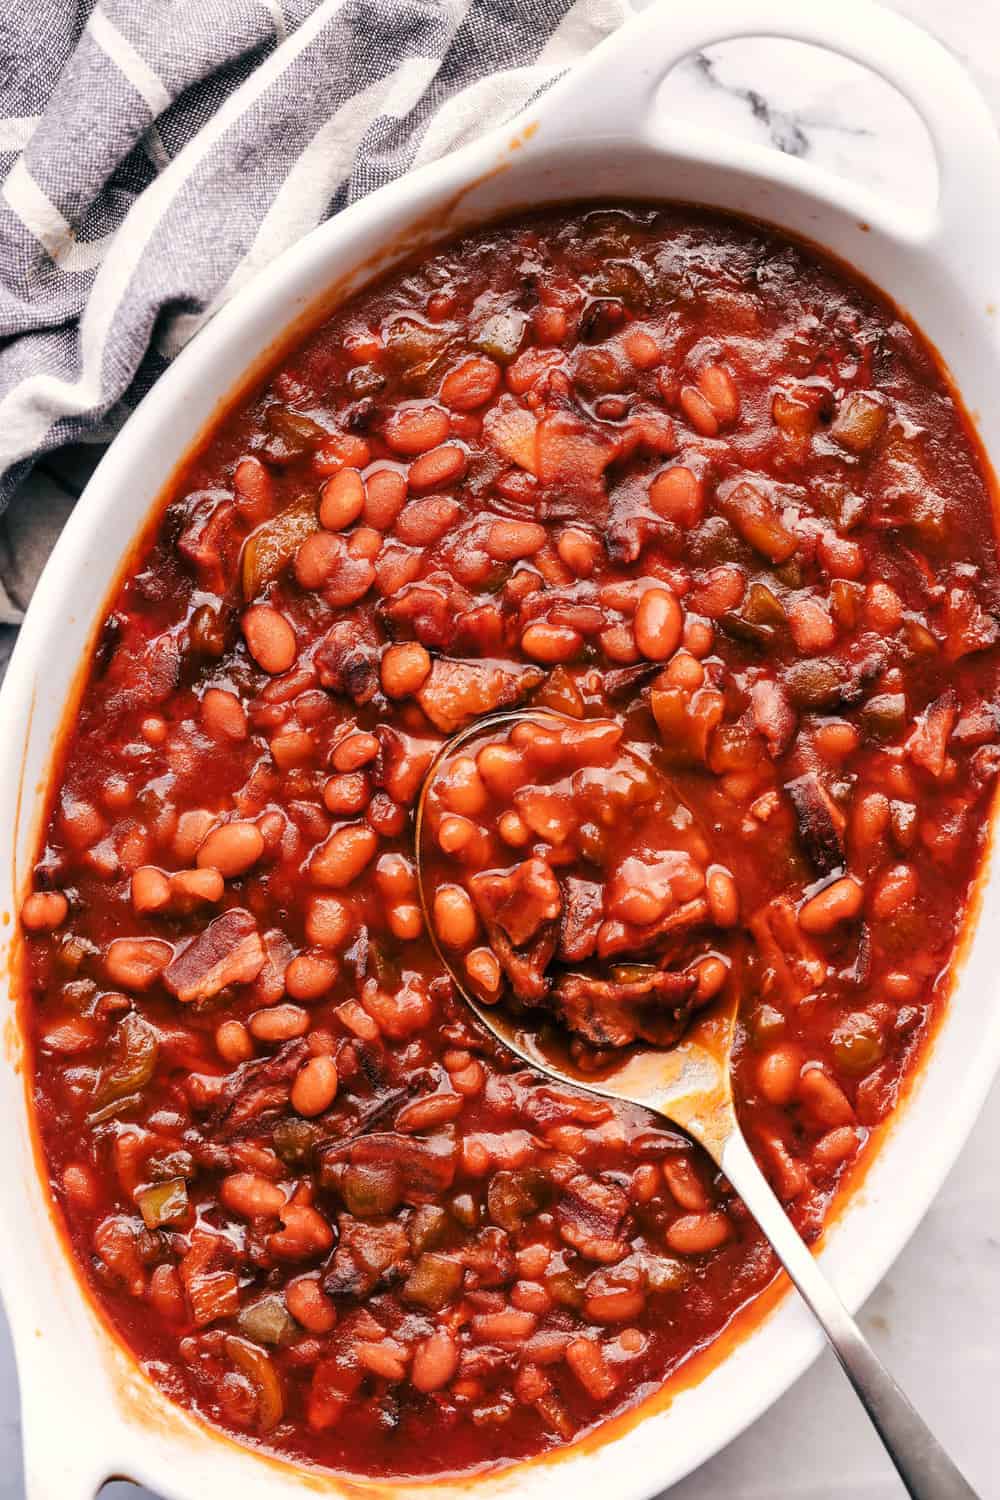 World's Best Baked Beans | The Recipe Critic